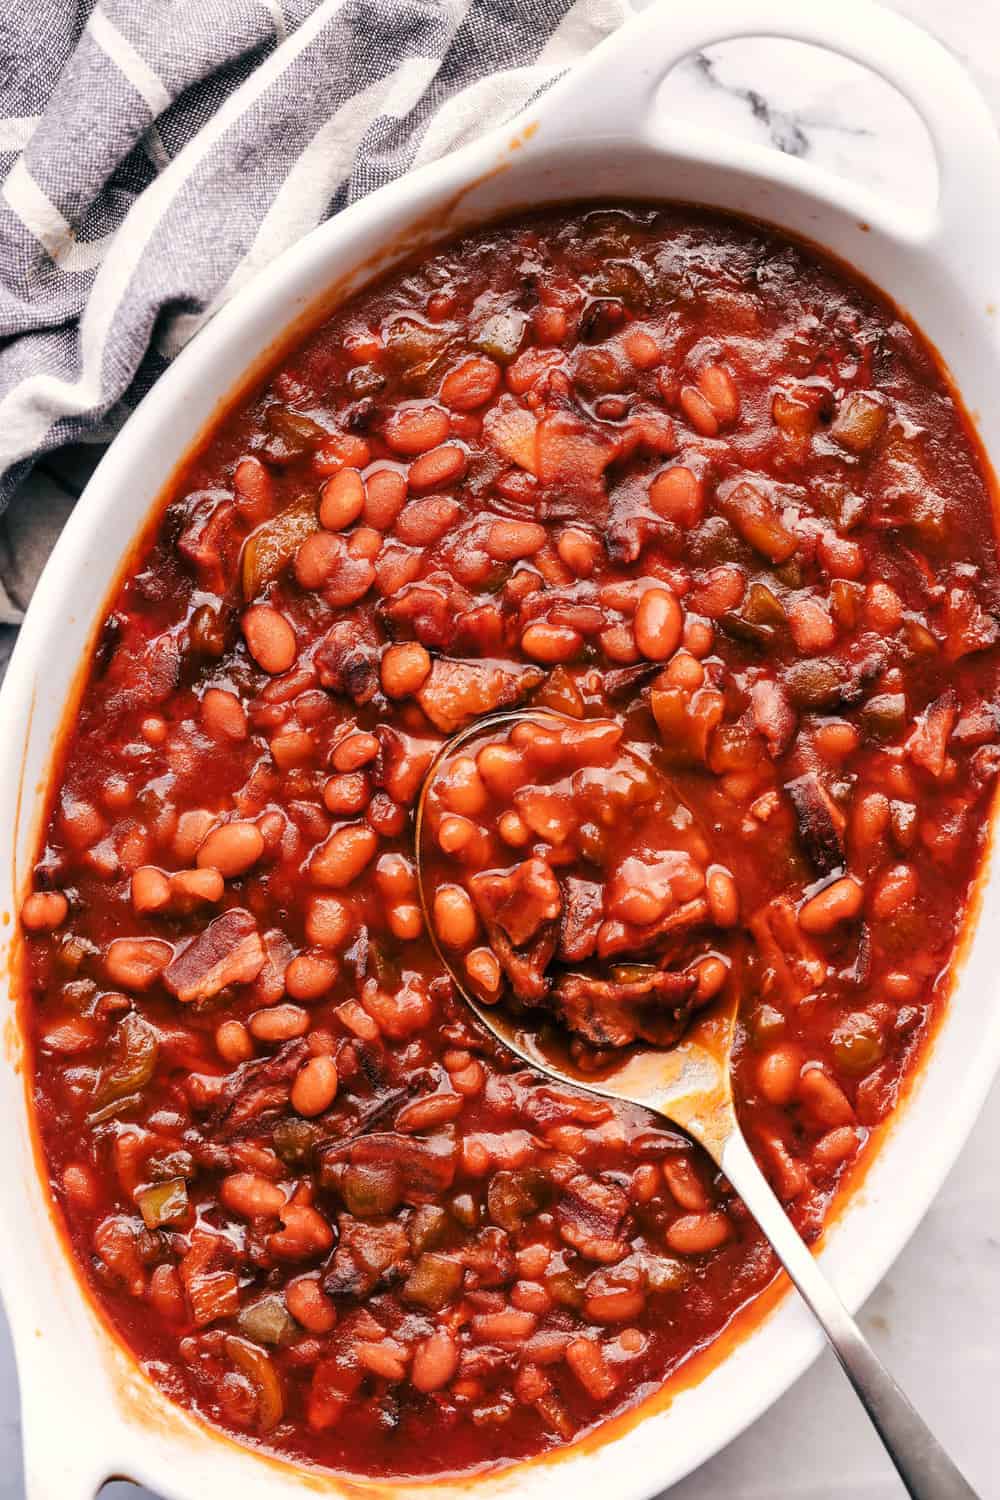 World's Best Baked Beans | The Recipe Critic